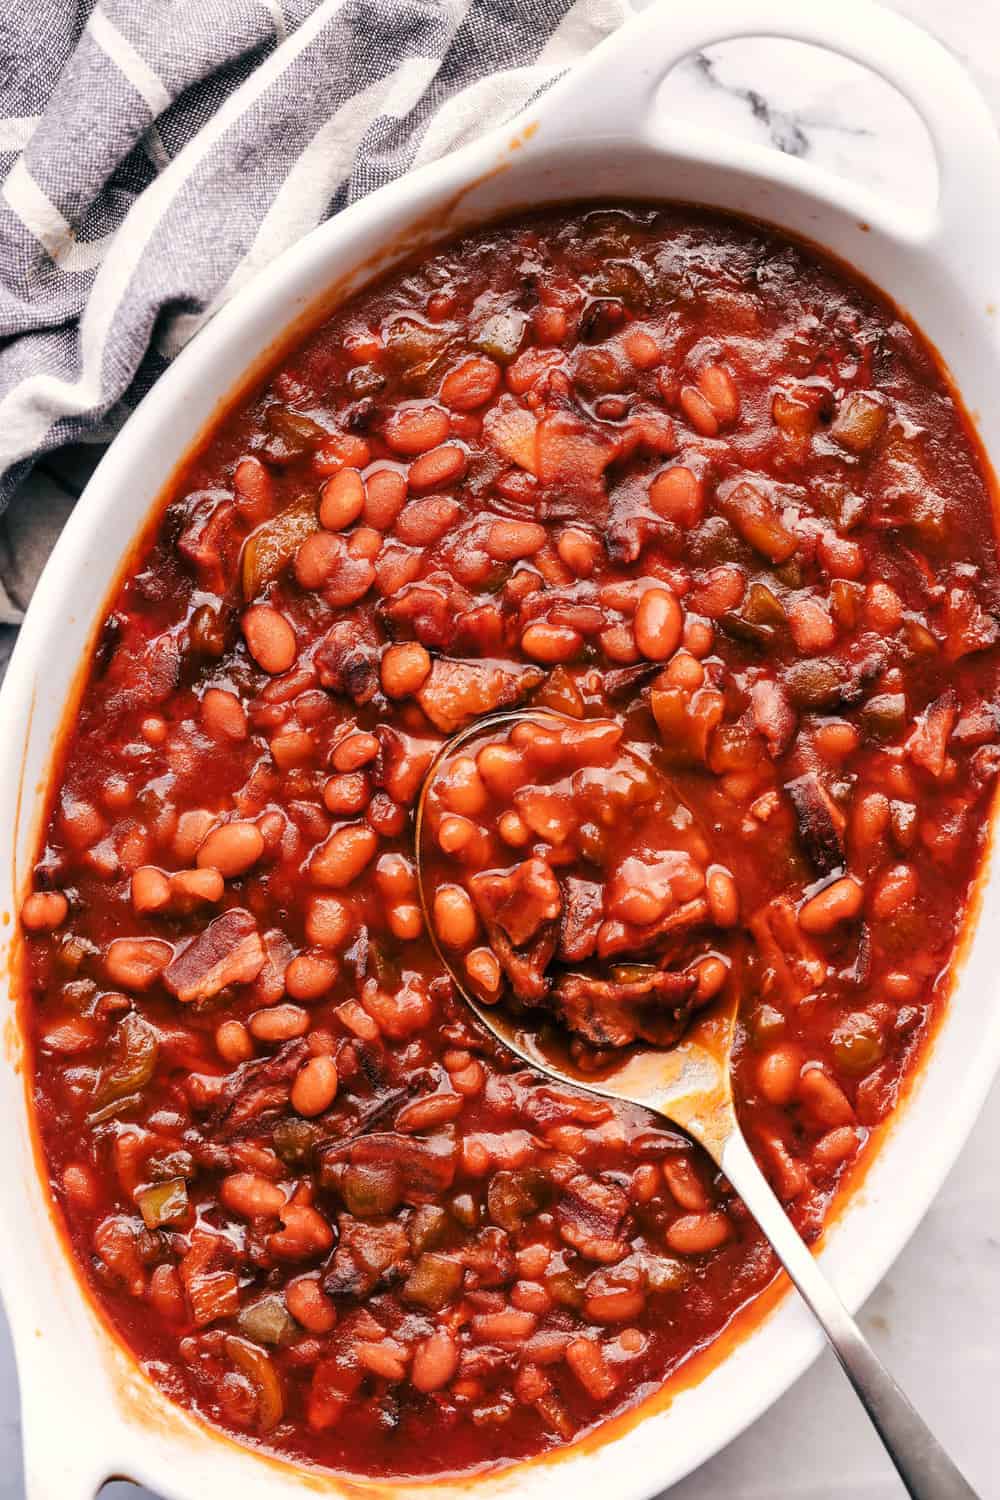 World's Best Baked Beans | The Recipe Critic